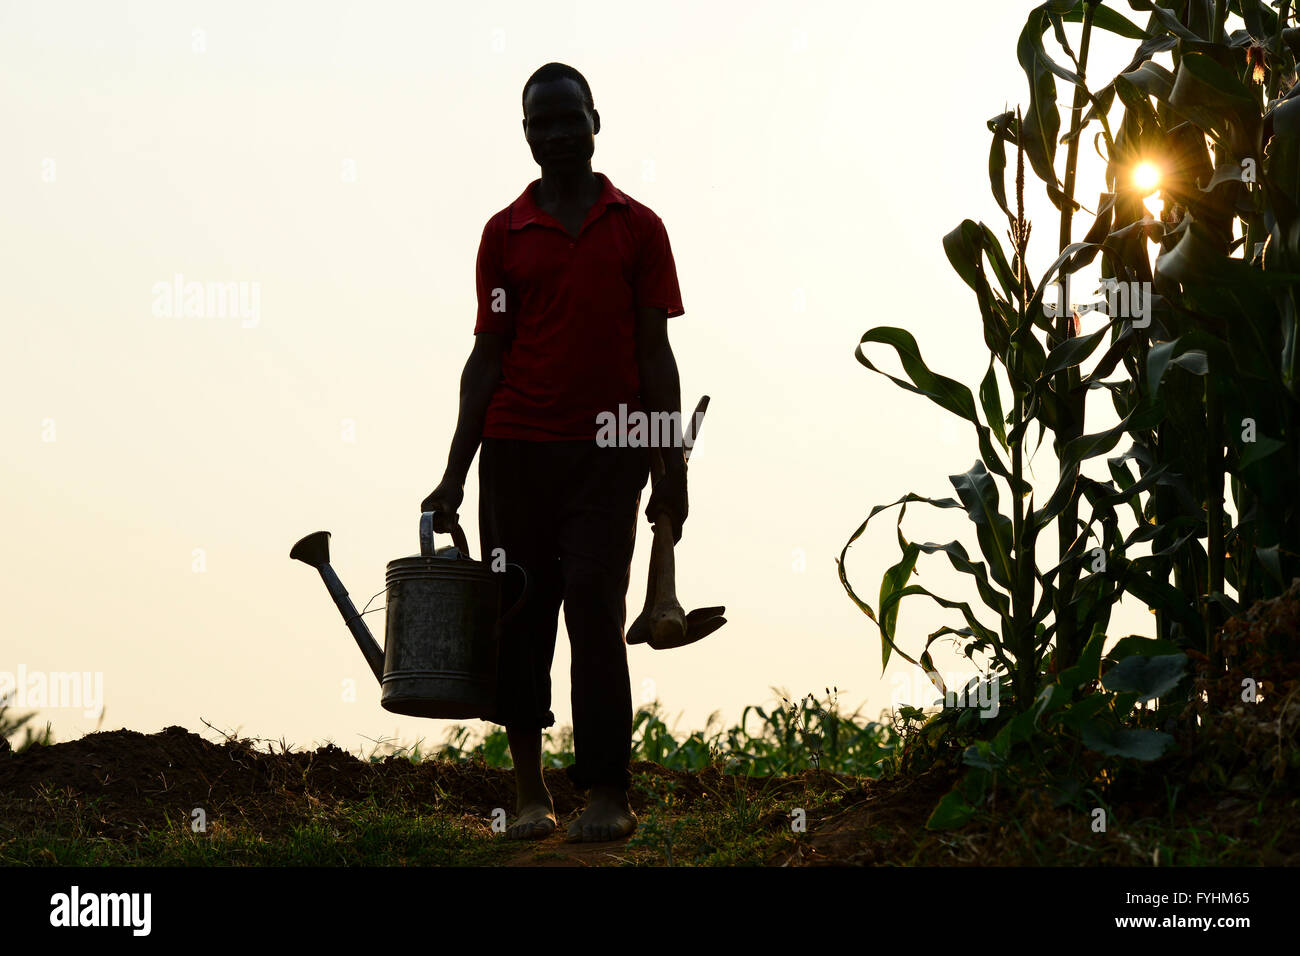 Malawi, Thyolo, irrigation in village Samuti, Silhouette of Farmer with watering can and hoe beside maize field, sun Stock Photo